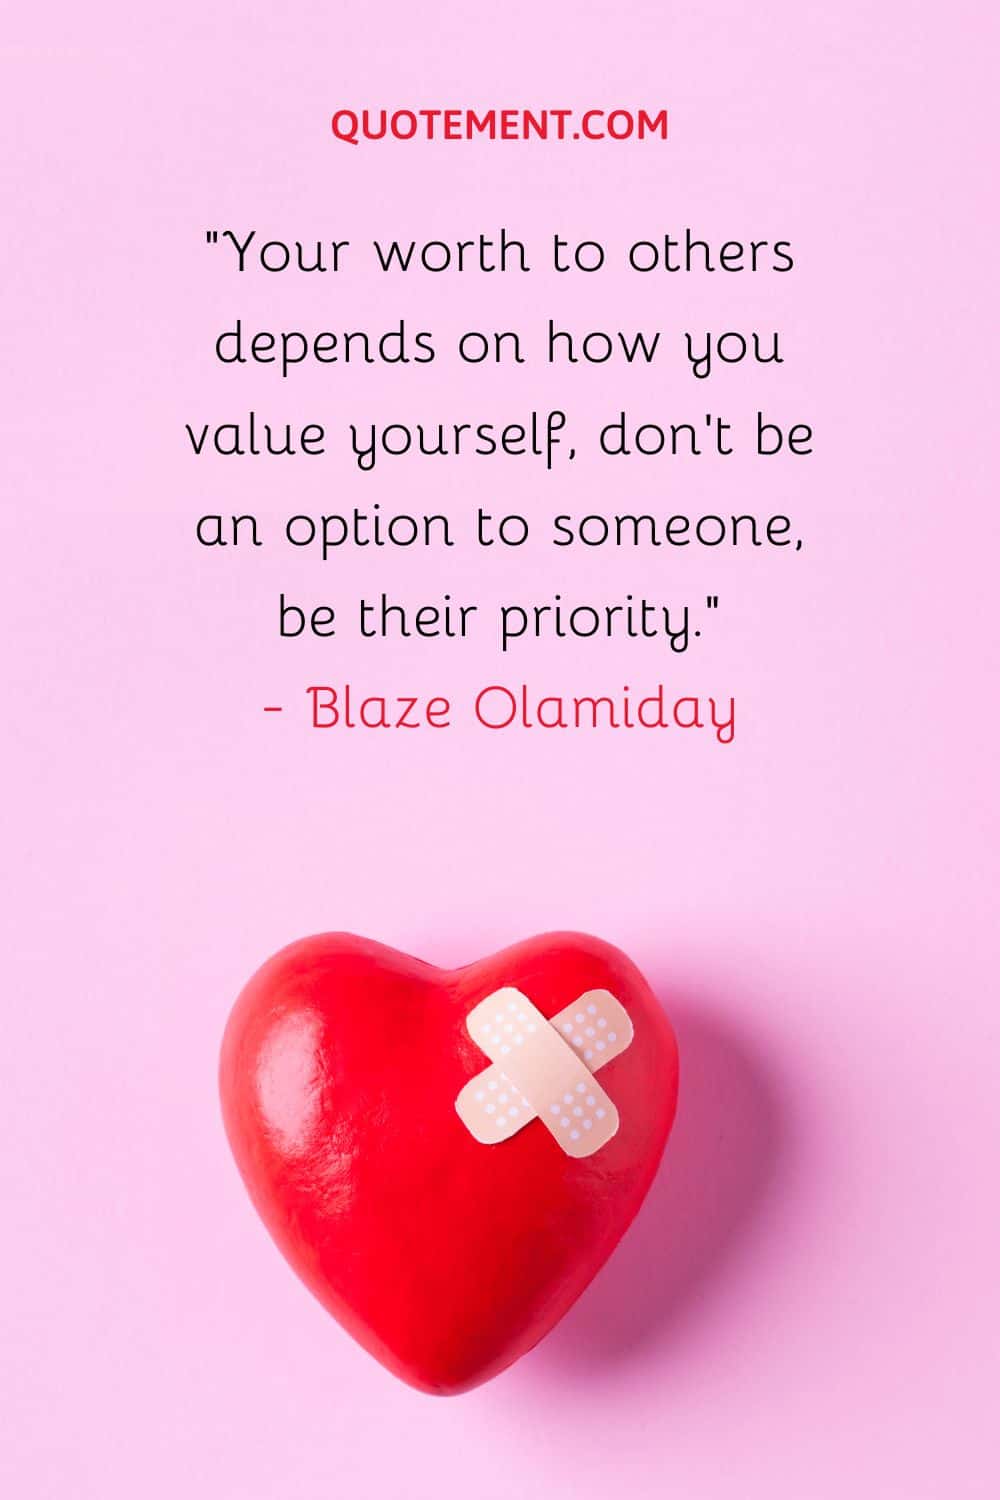 Your worth to others depends on how you value yourself, don’t be an option to someone, be their priority